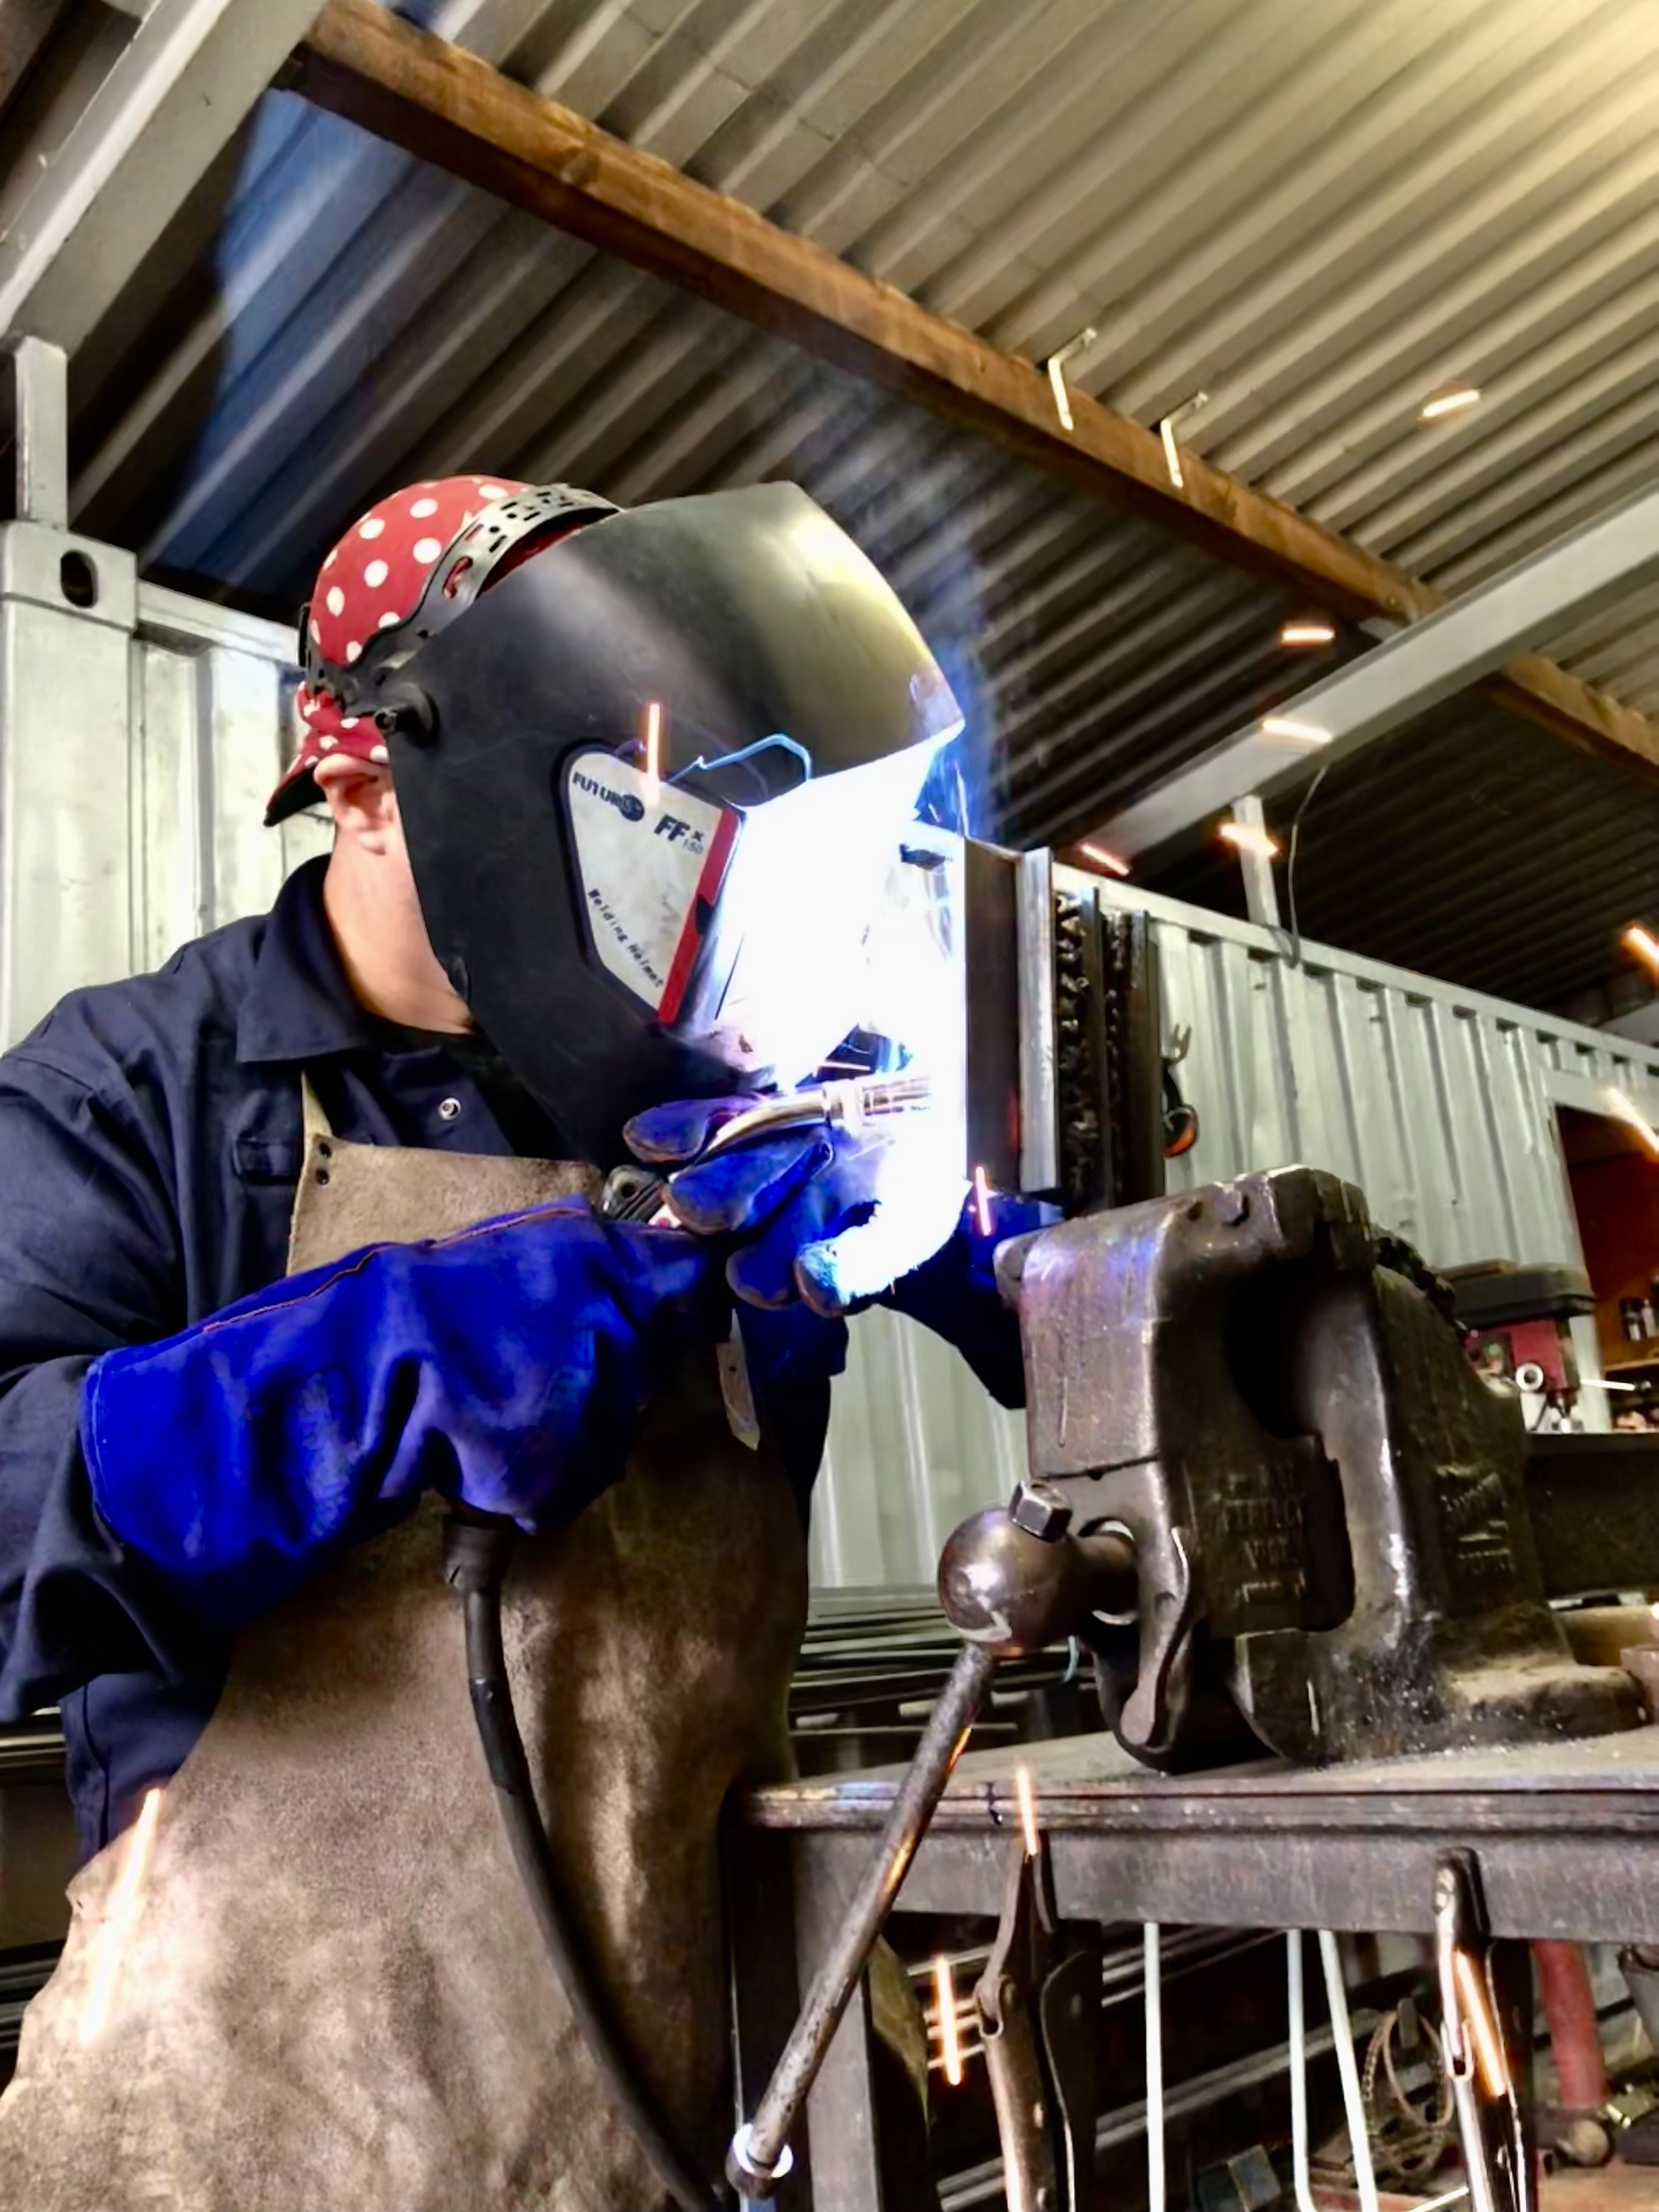 Mig welding day course for beginners